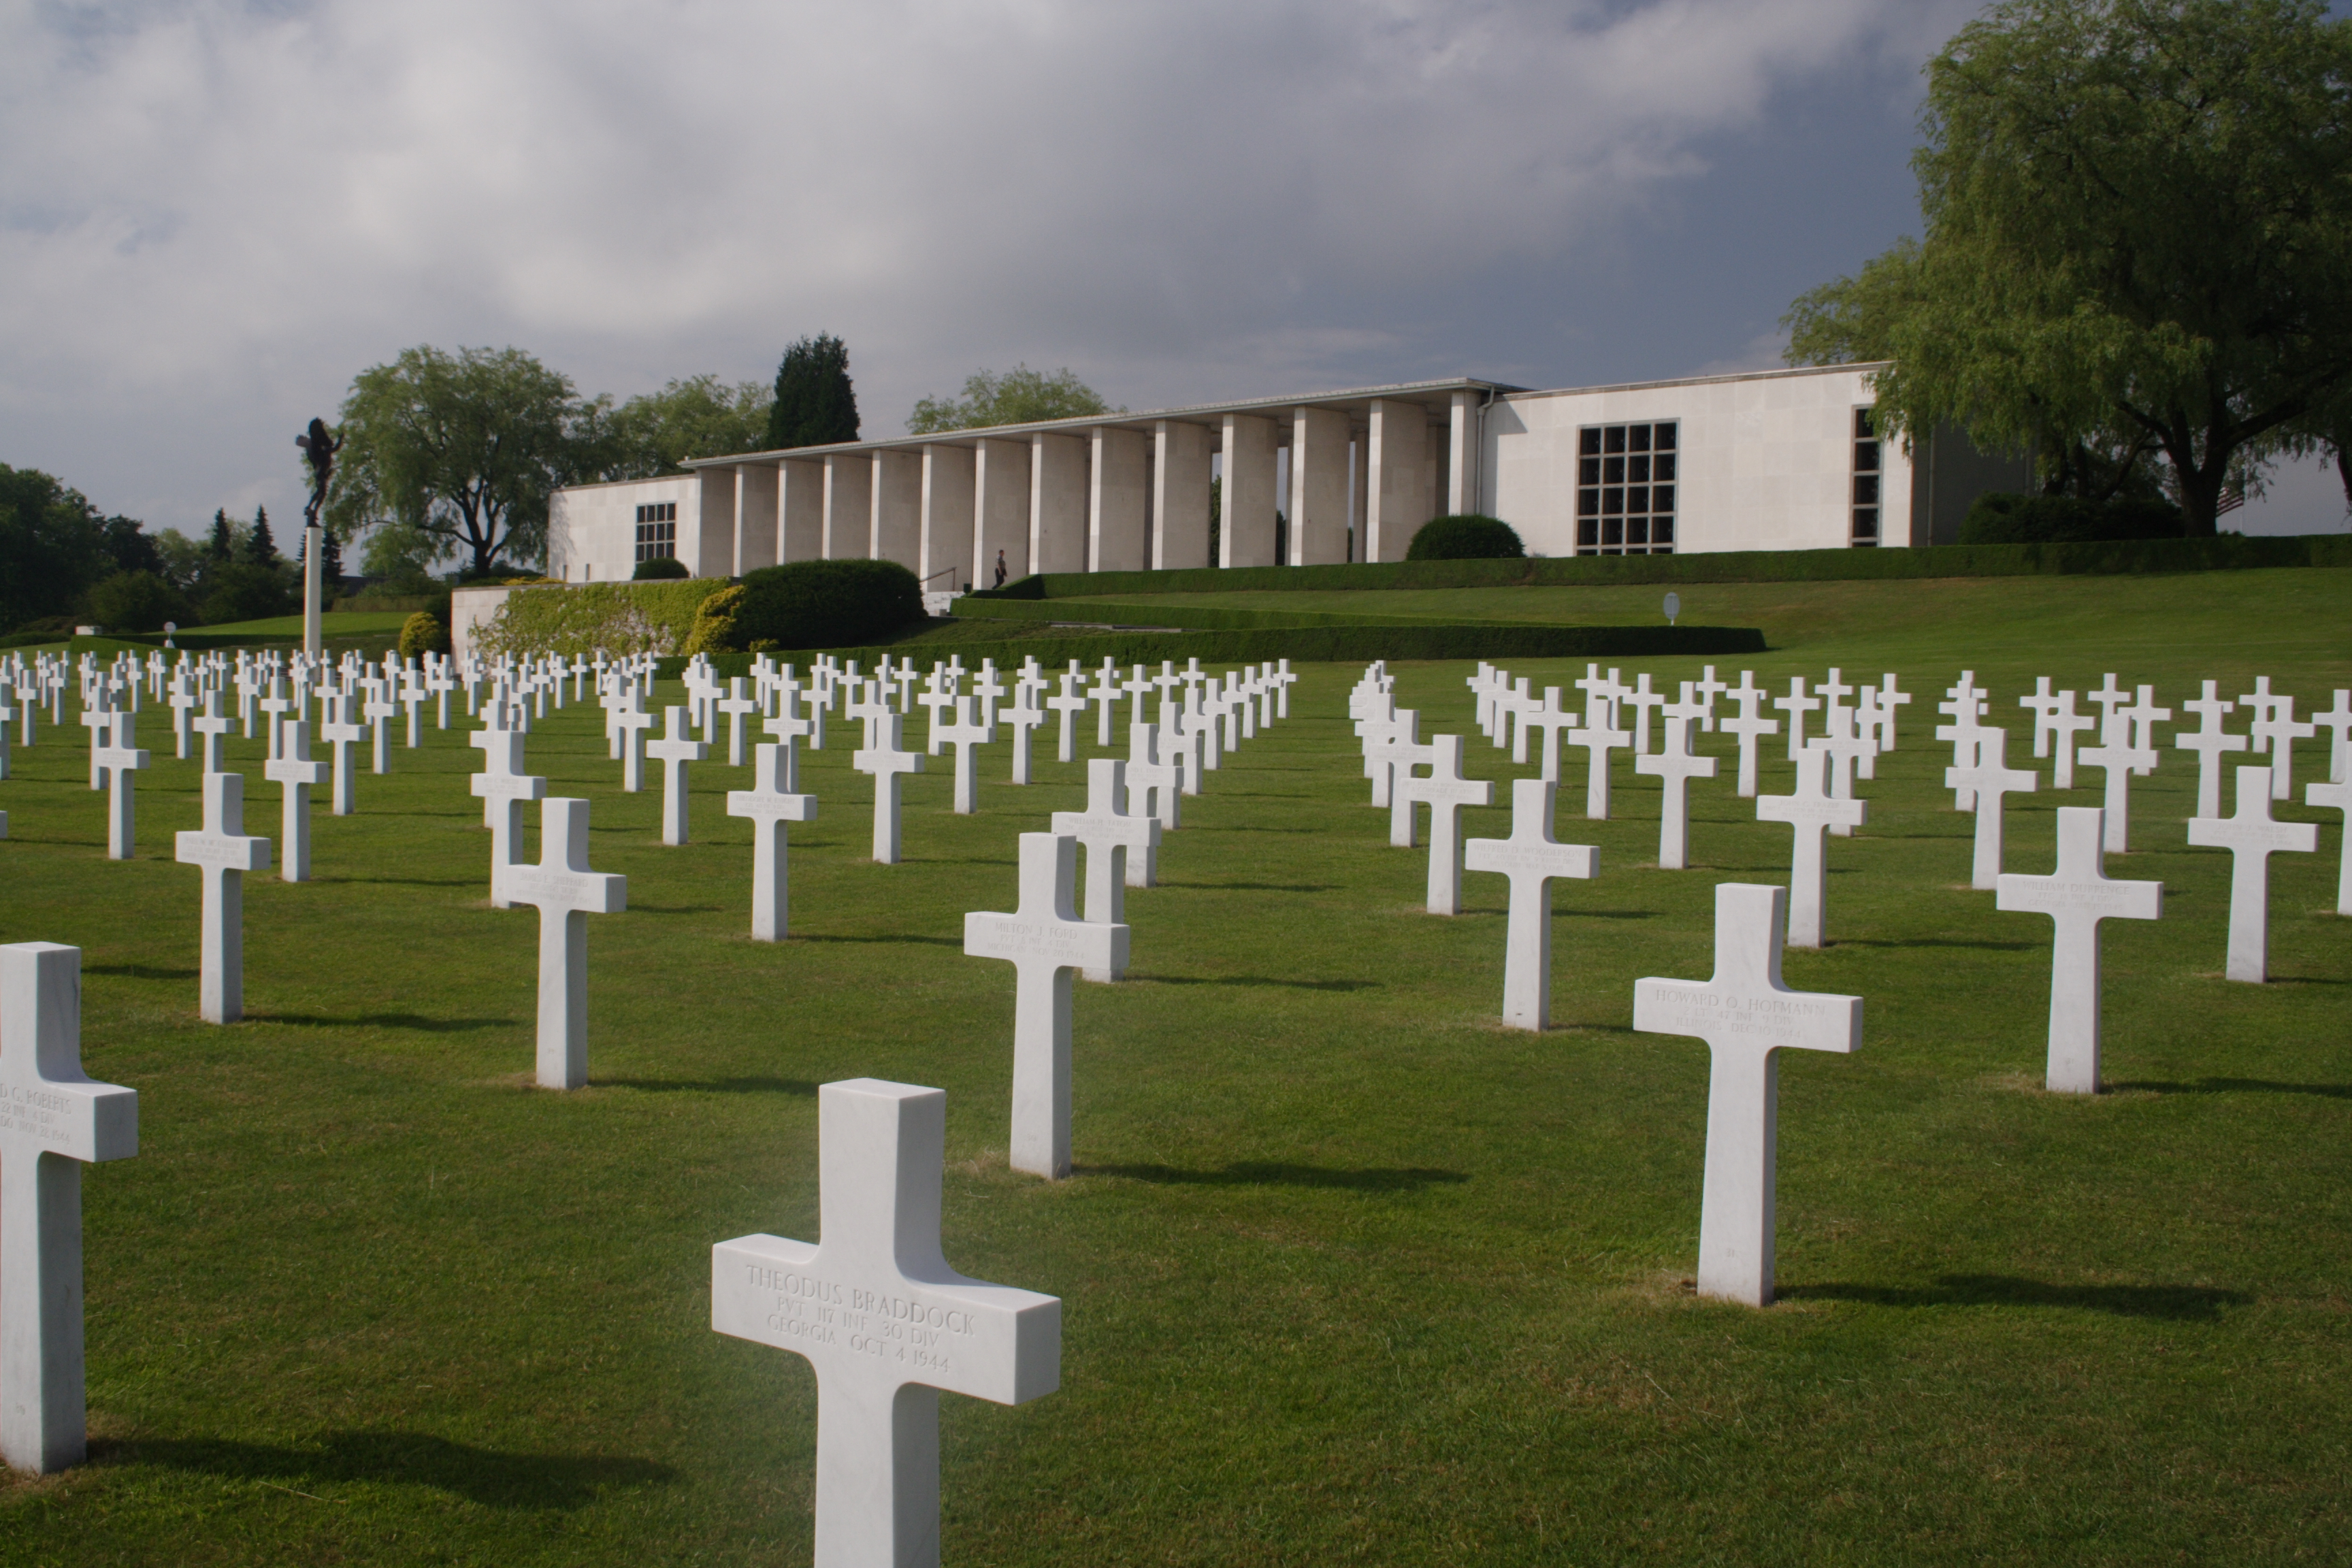 Headstones in front of the memorial building at Henri-Chapelle American Cemetery.